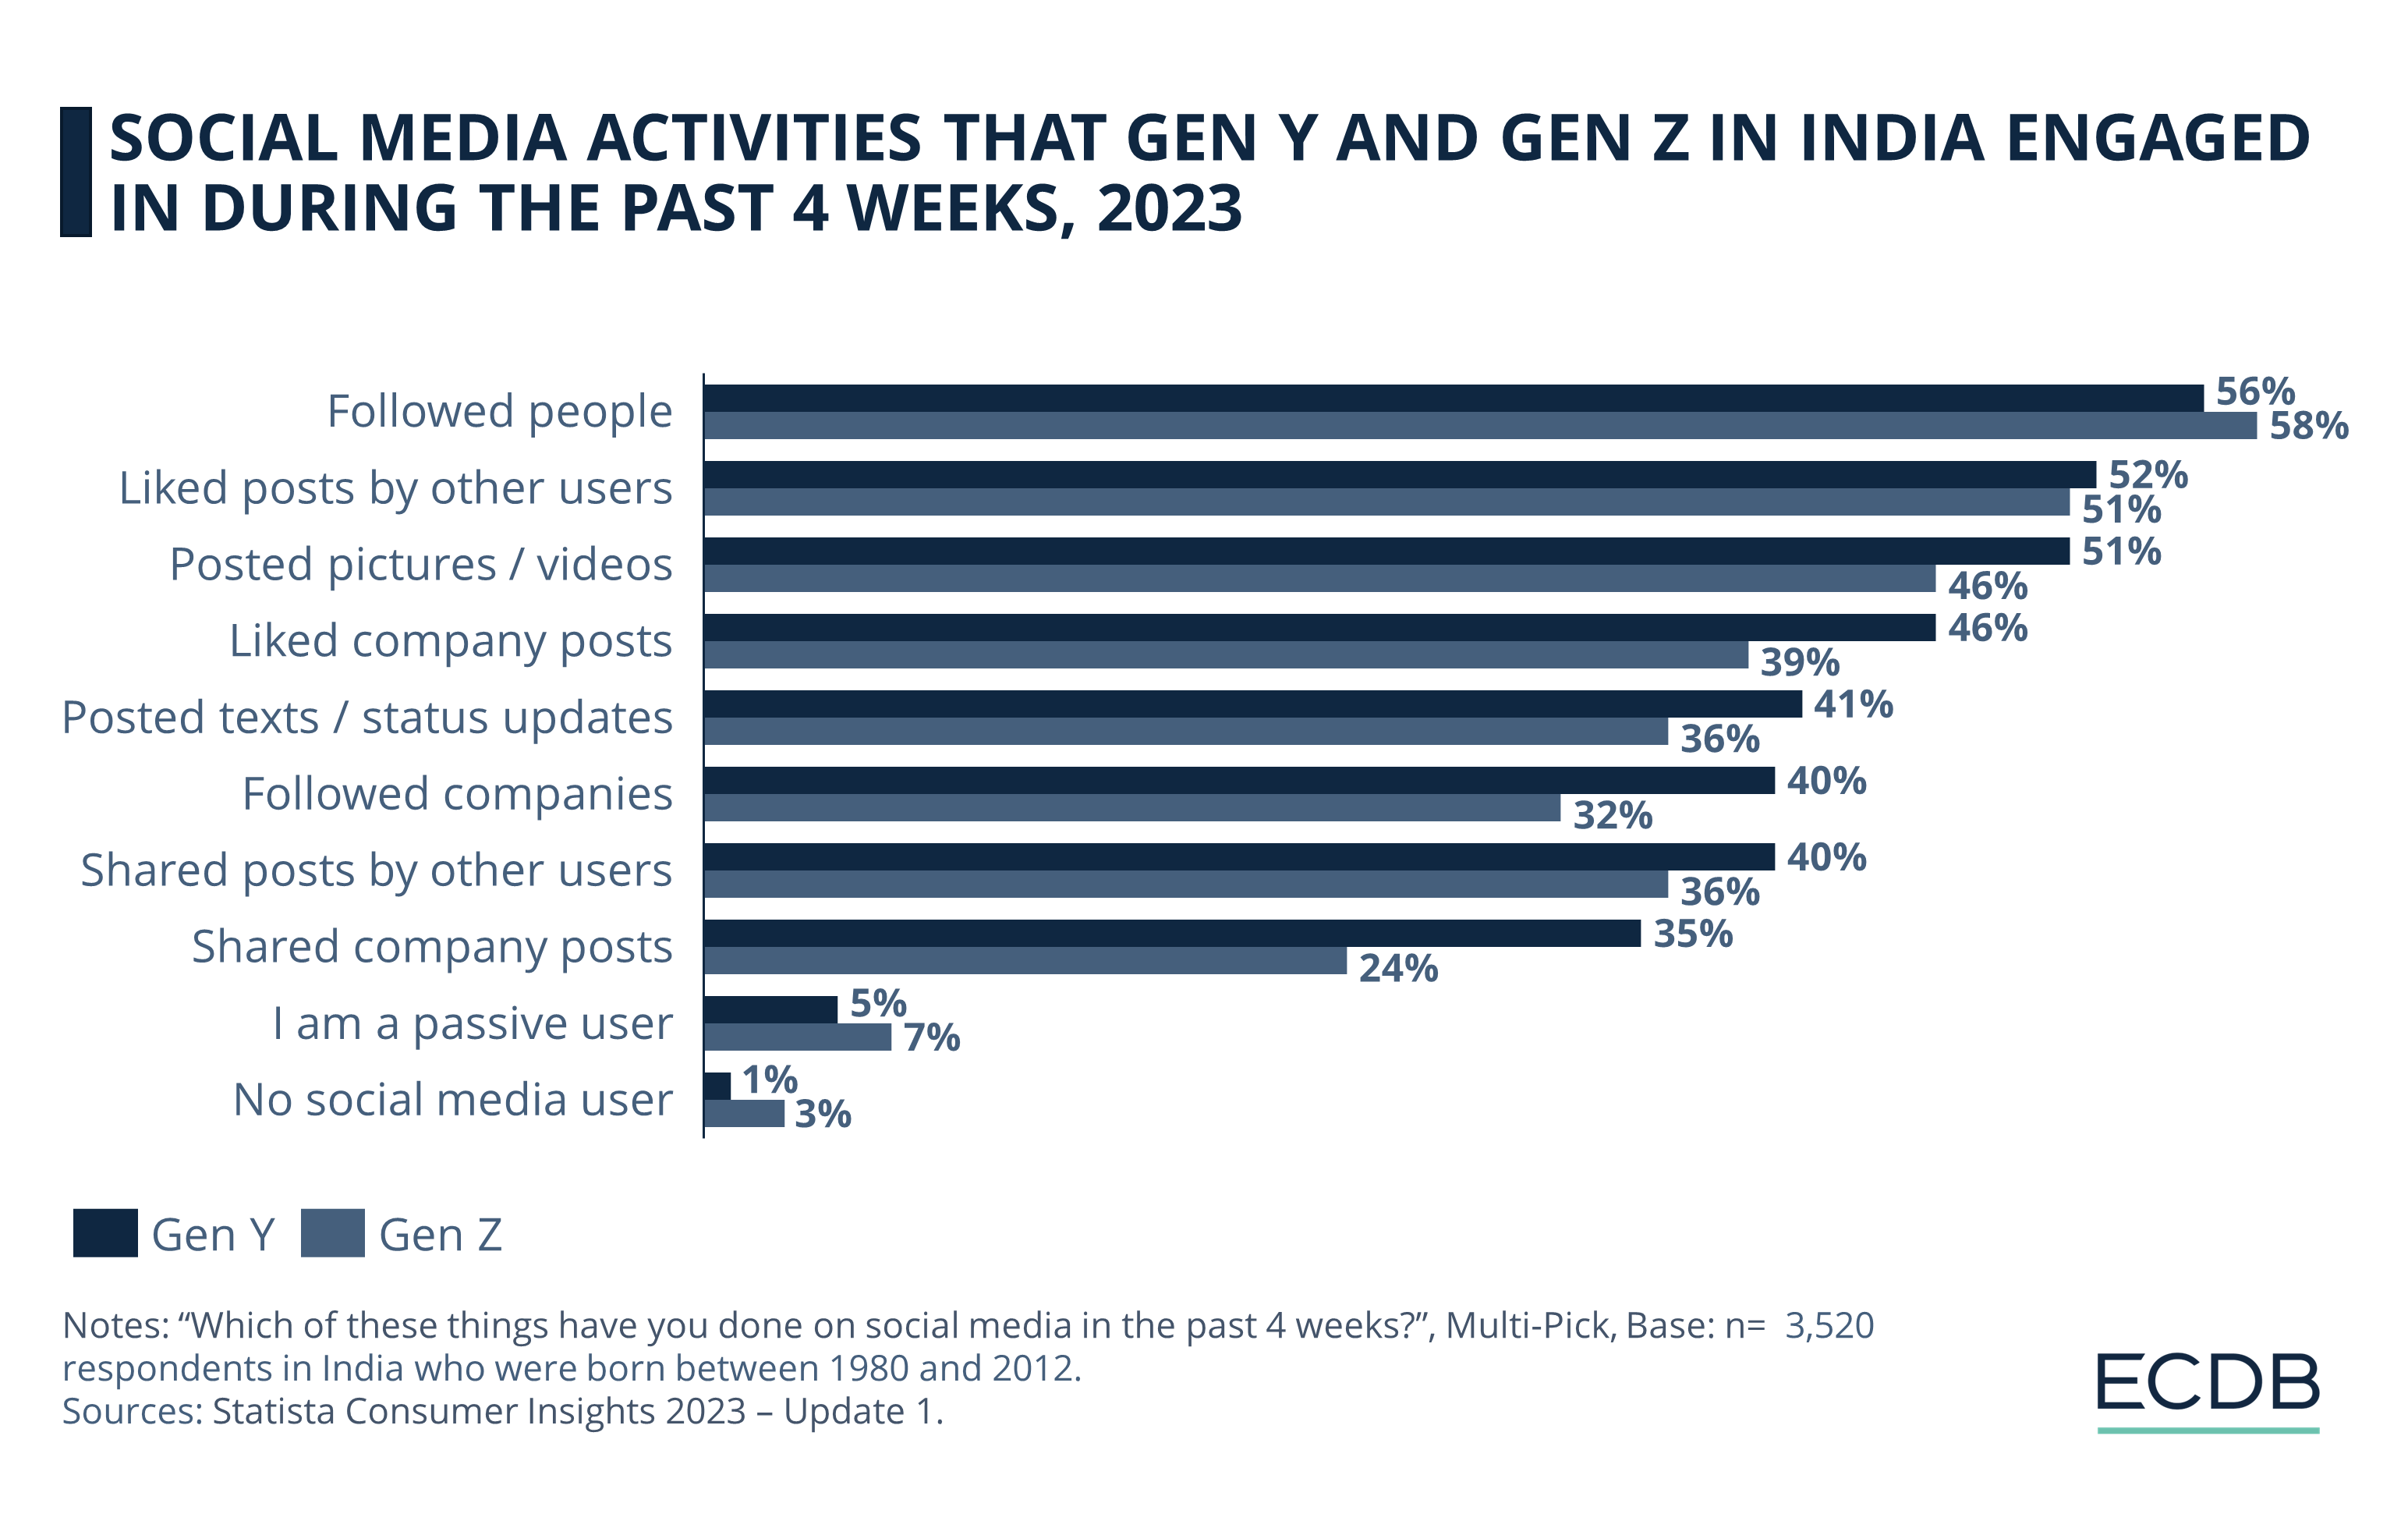 Social Media Activities Among Generations Y and Z in India, 2023